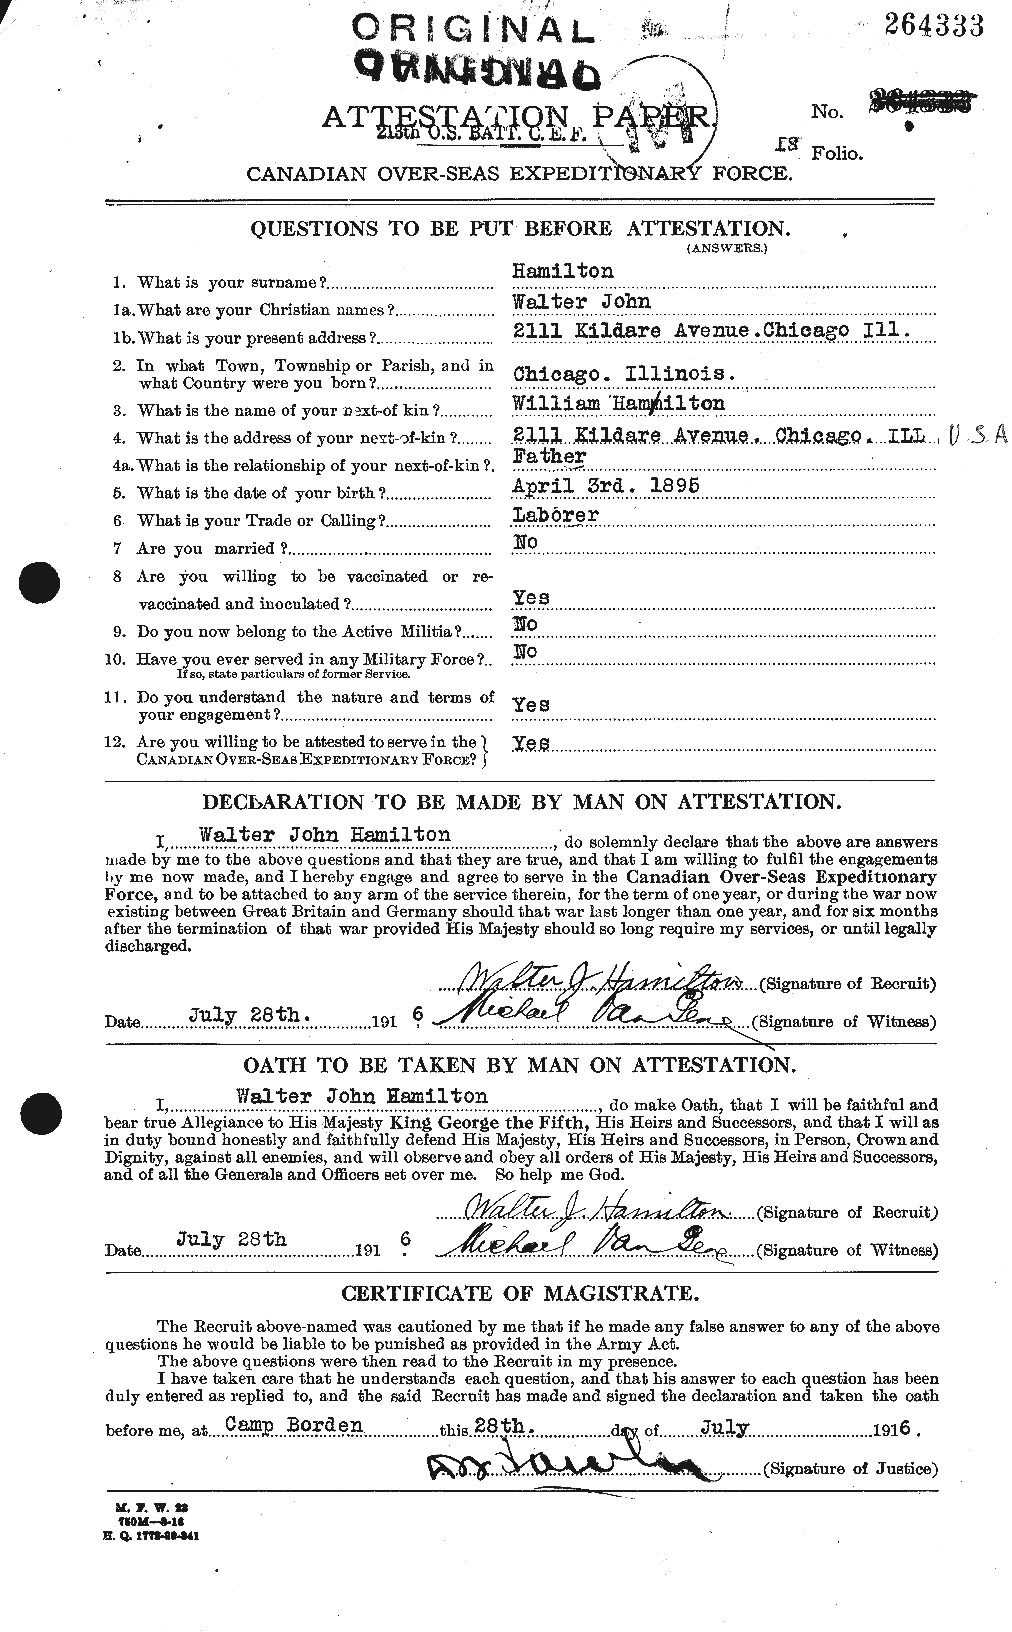 Personnel Records of the First World War - CEF 374812a